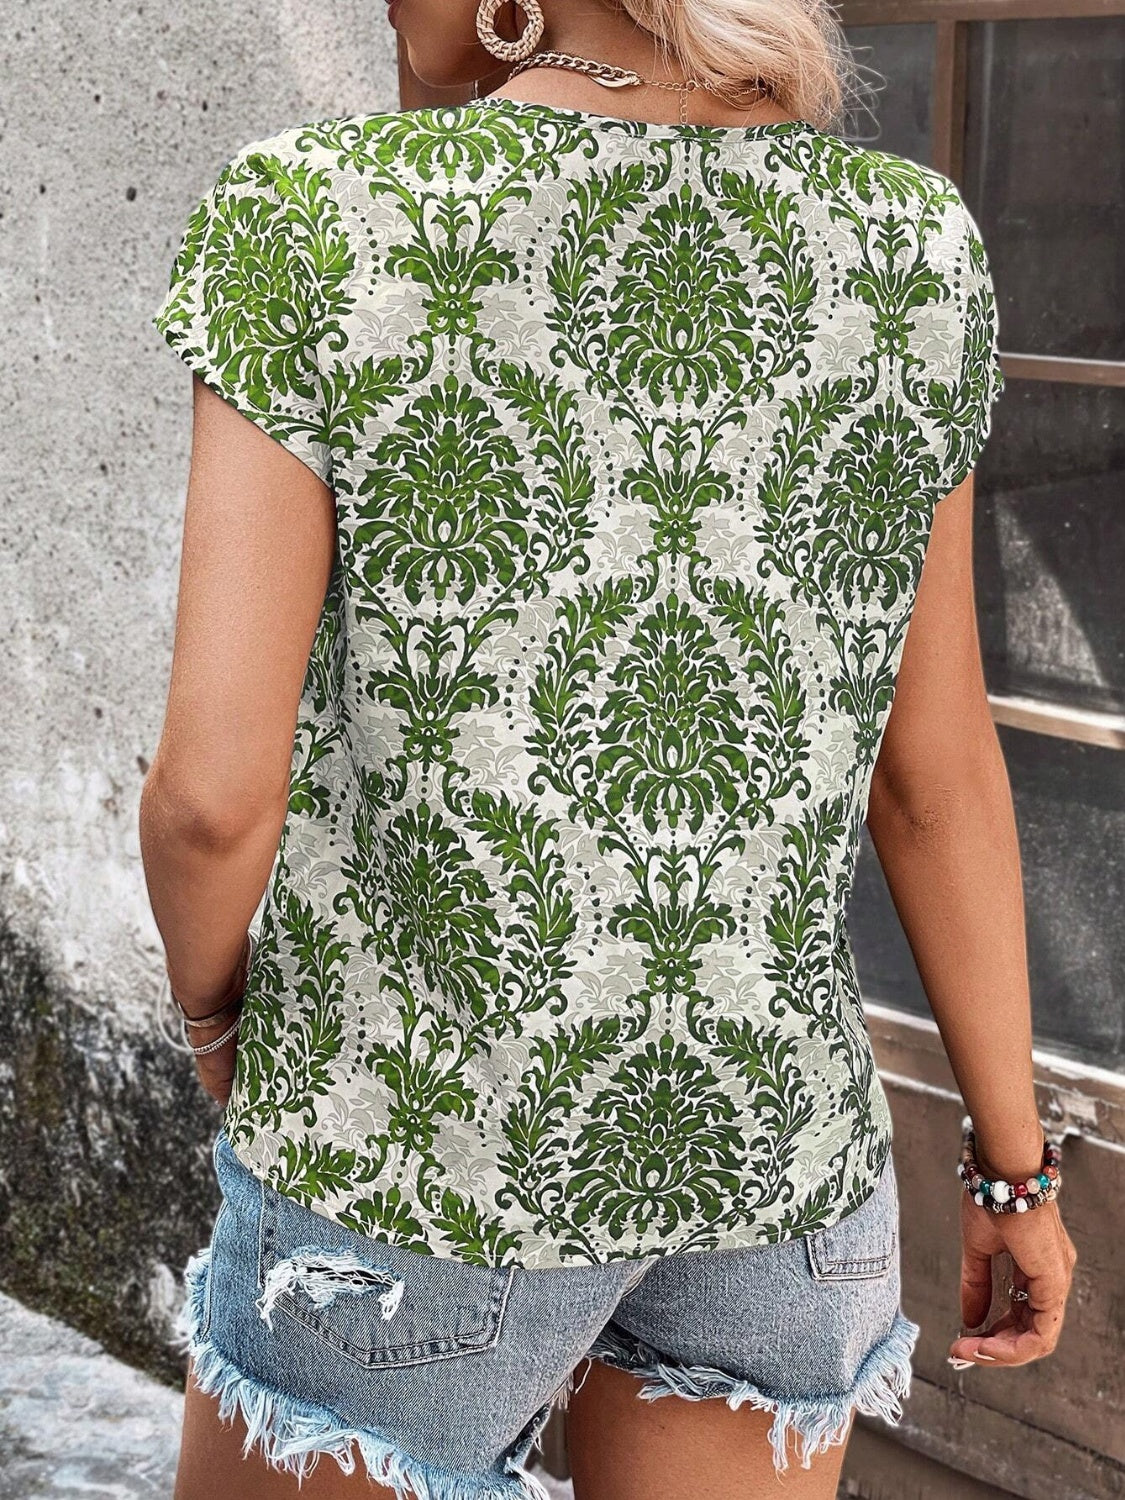 Elevate your style with our Printed Short Sleeve Blouse - available in blue, green, taupe. Perfect blend of comfort & chic fashion.